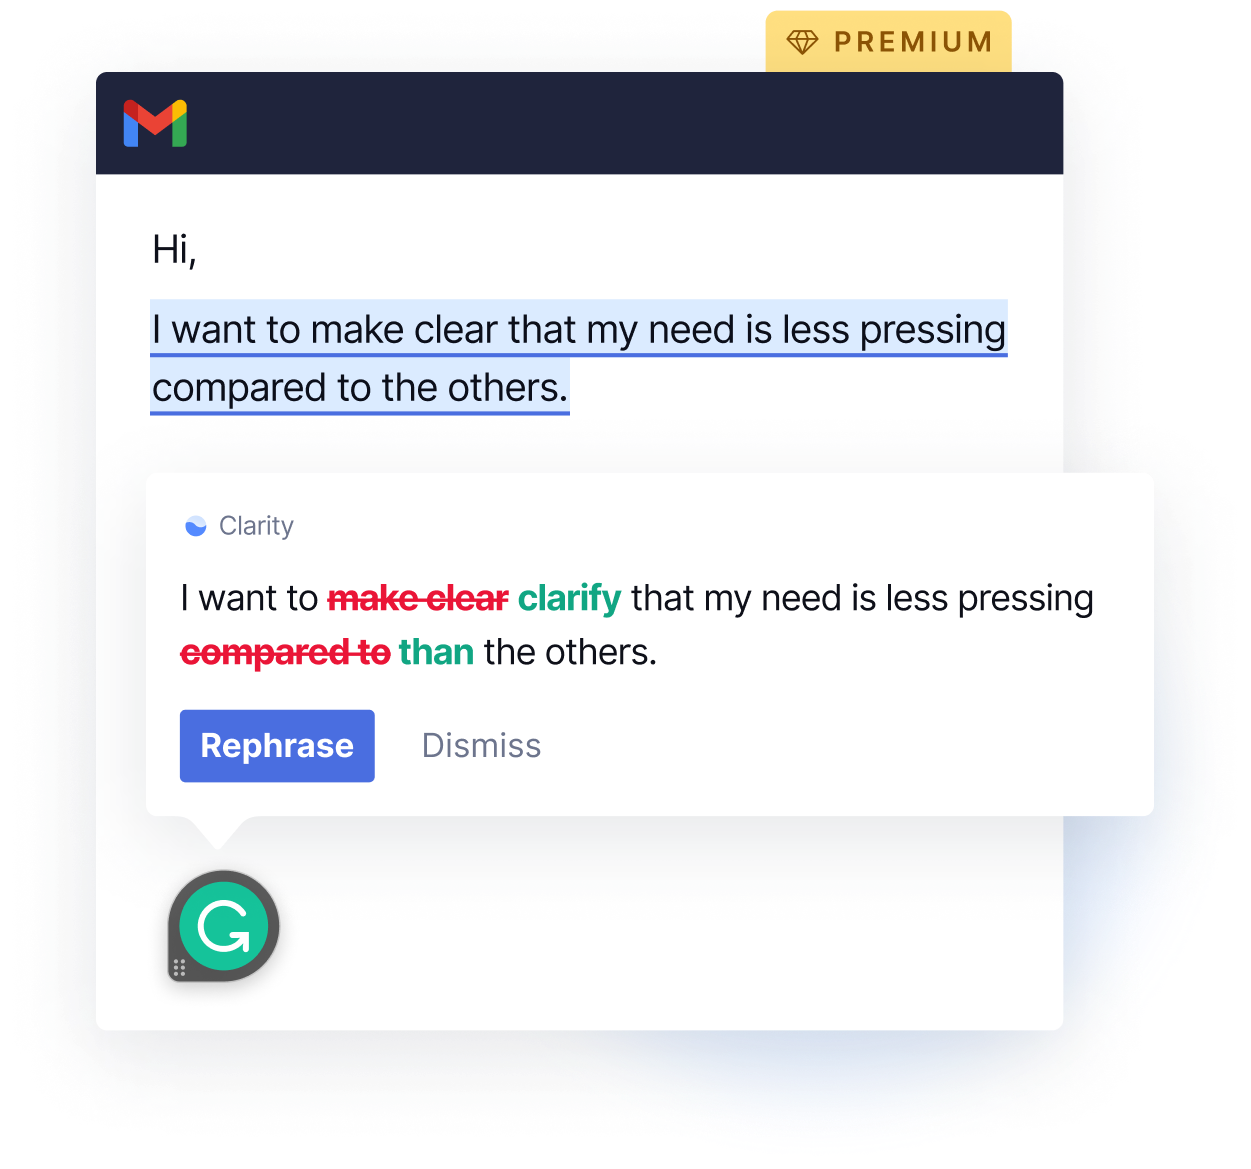 Full sentence rewrite example in Gmail